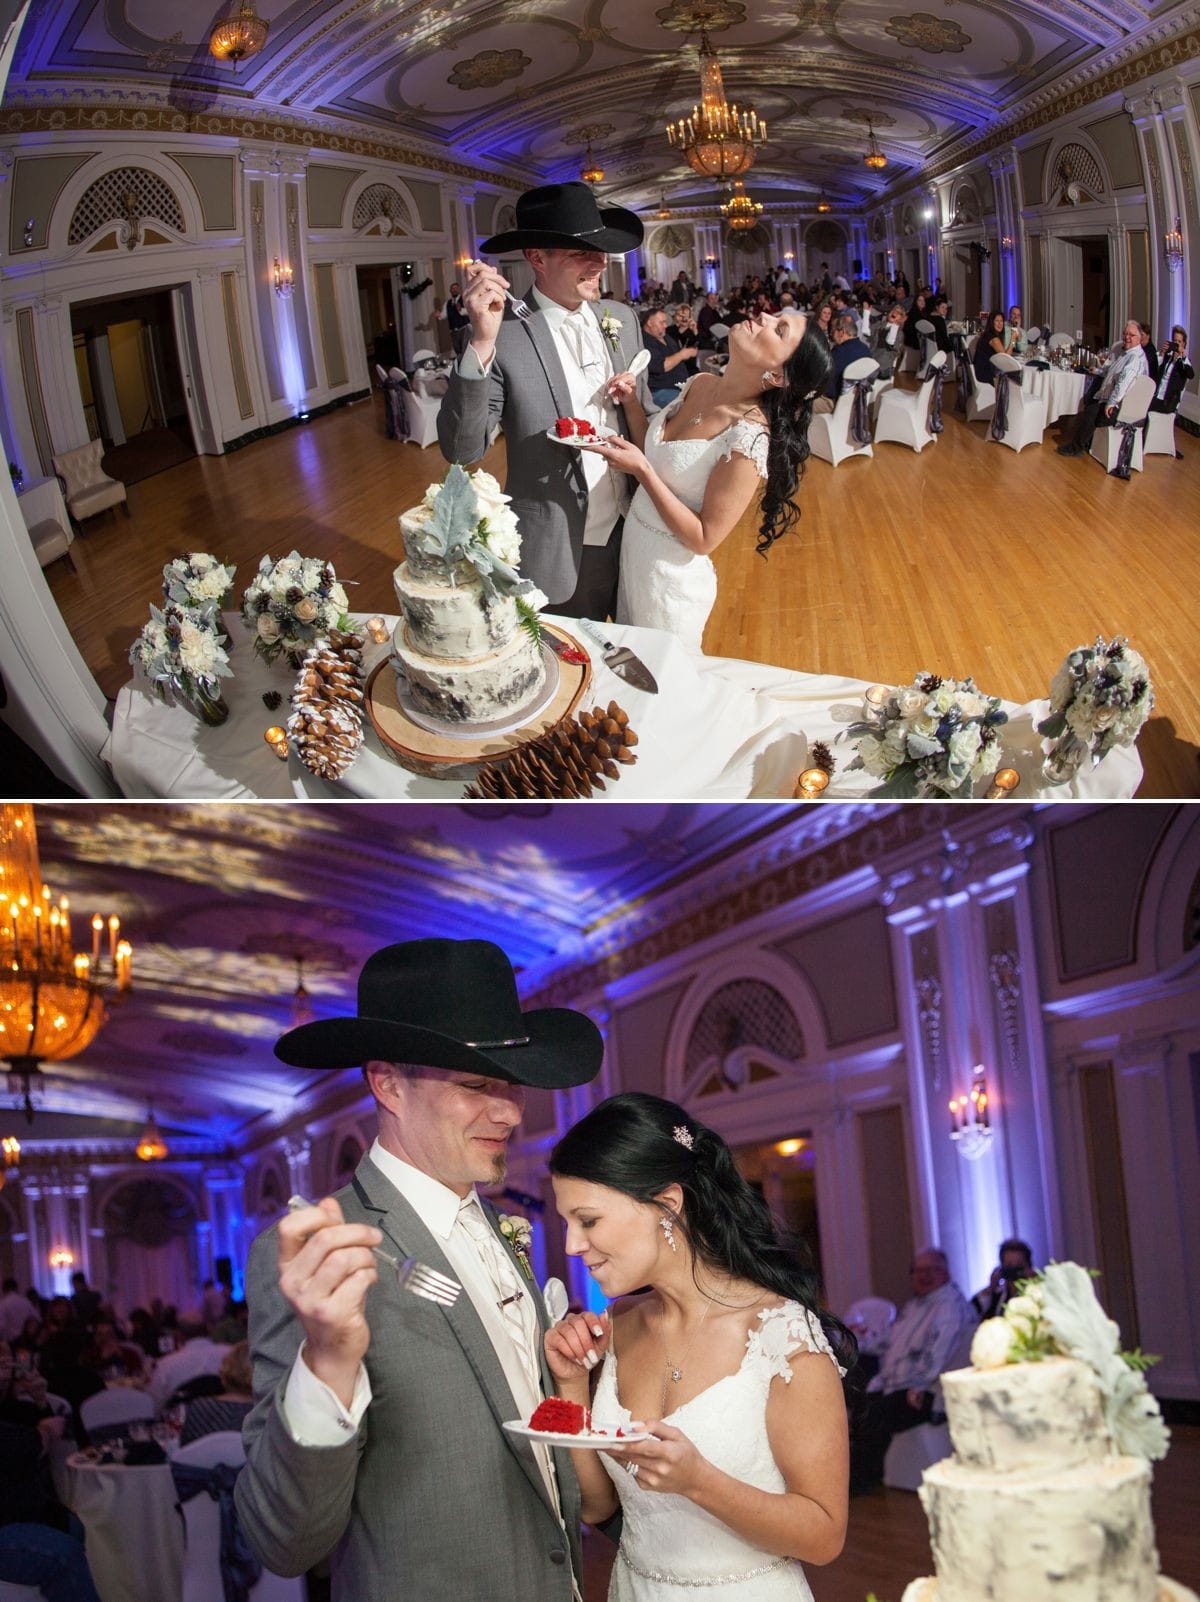 Wedding lighting at Greysolon Ballroom. Up lighting in blue and ice blue. Snowflake gobos on ceiling.
Photo by Al & Lyndsey On3 Photography.